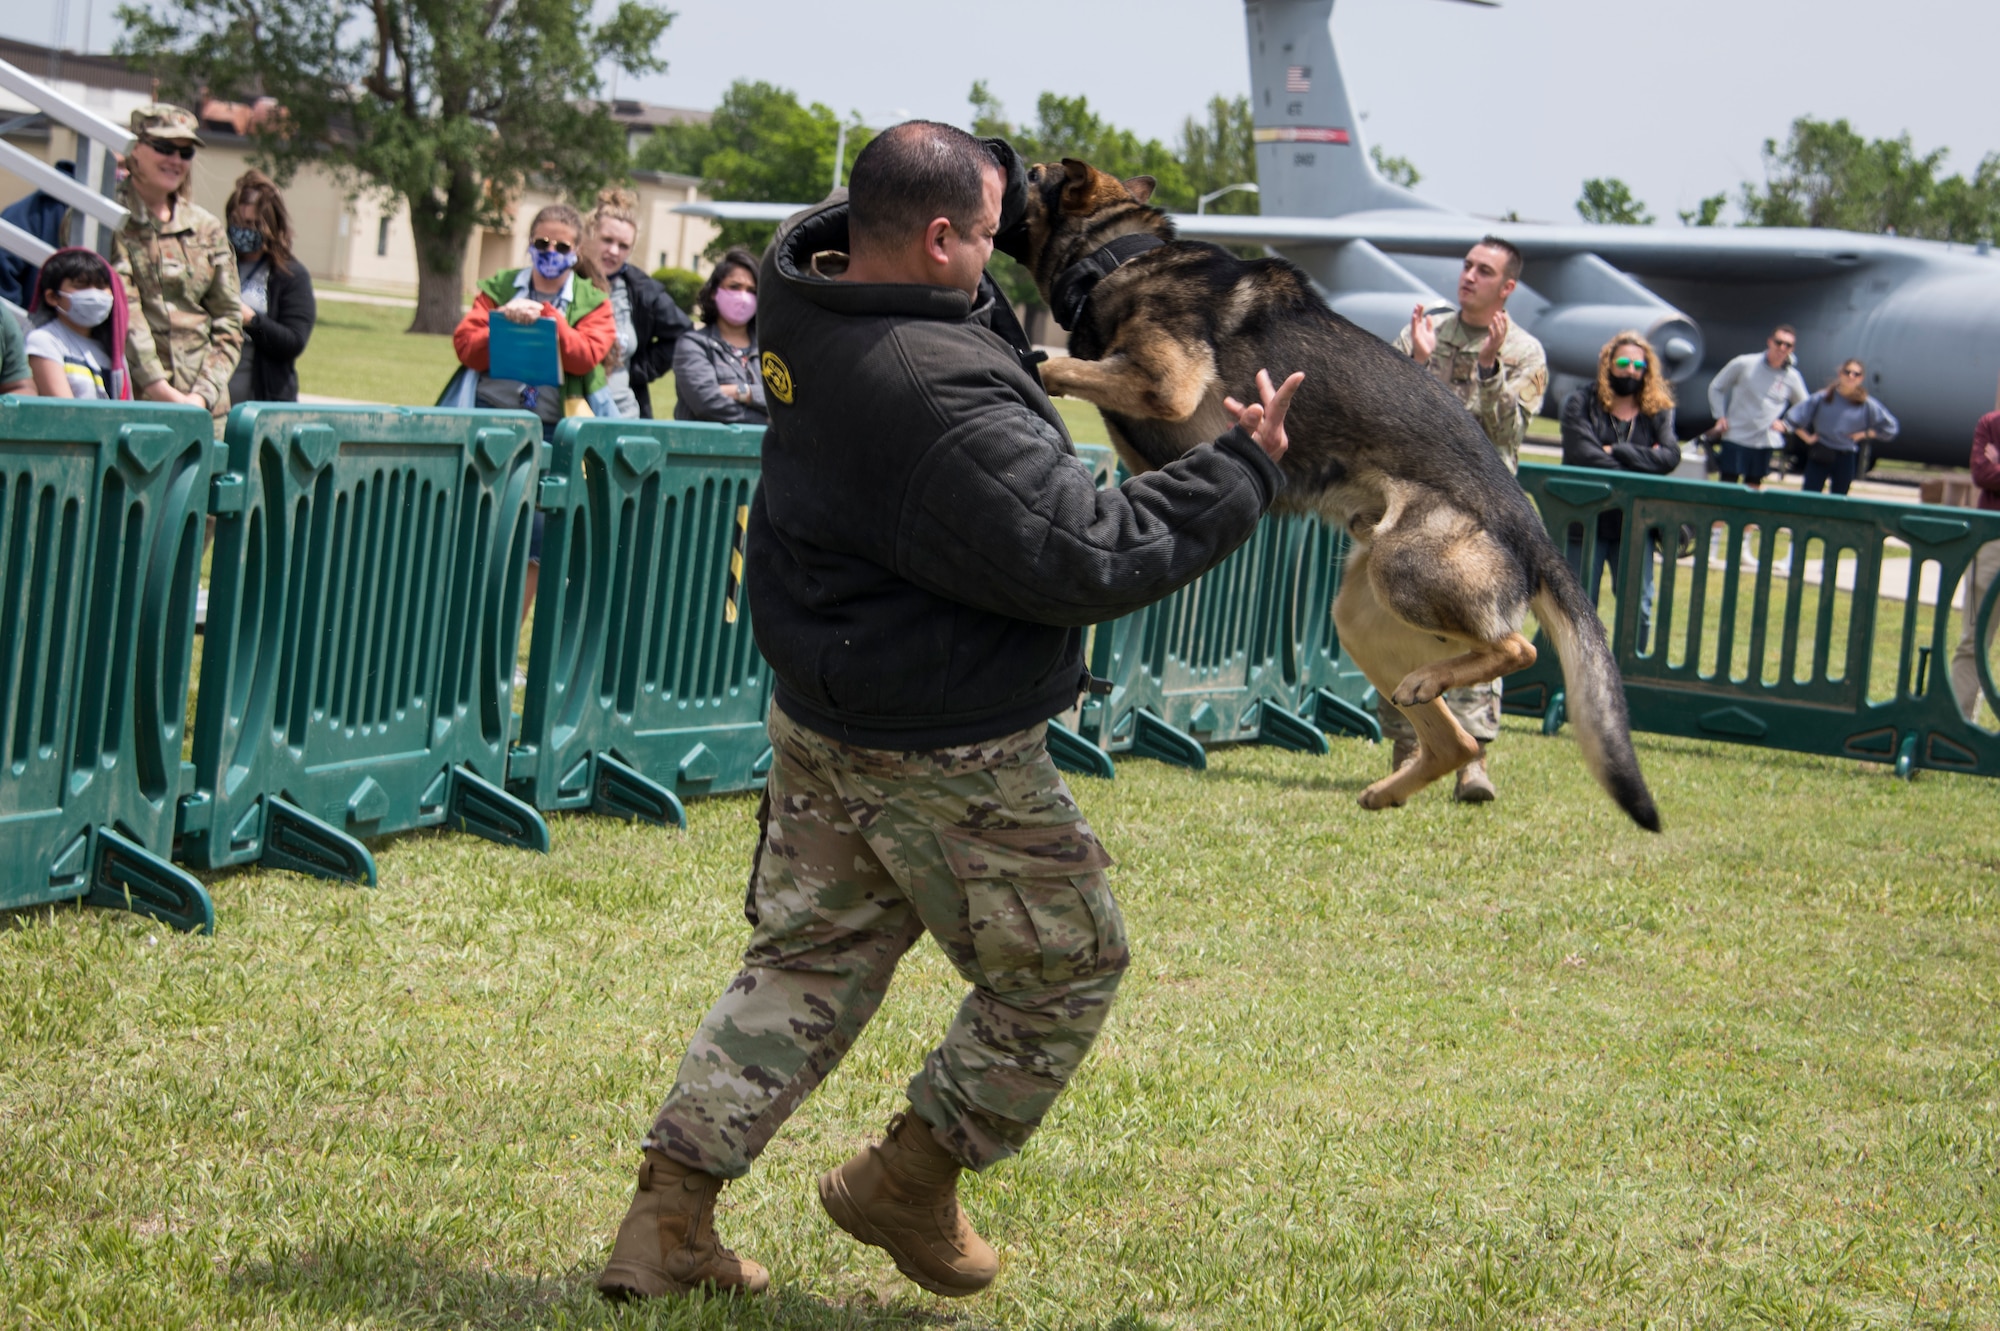 Bingo, a 97th Air Mobility Wing military working dog, takes down a simulated perpetrator during a demonstration to fifth-grade students, April 29, 2021, at Altus Air Force Base, Oklahoma. The demonstration showcased the capabilities of the working dogs and their handlers. (U.S. Air Force photo by Airman 1st Class Amanda Lovelace)